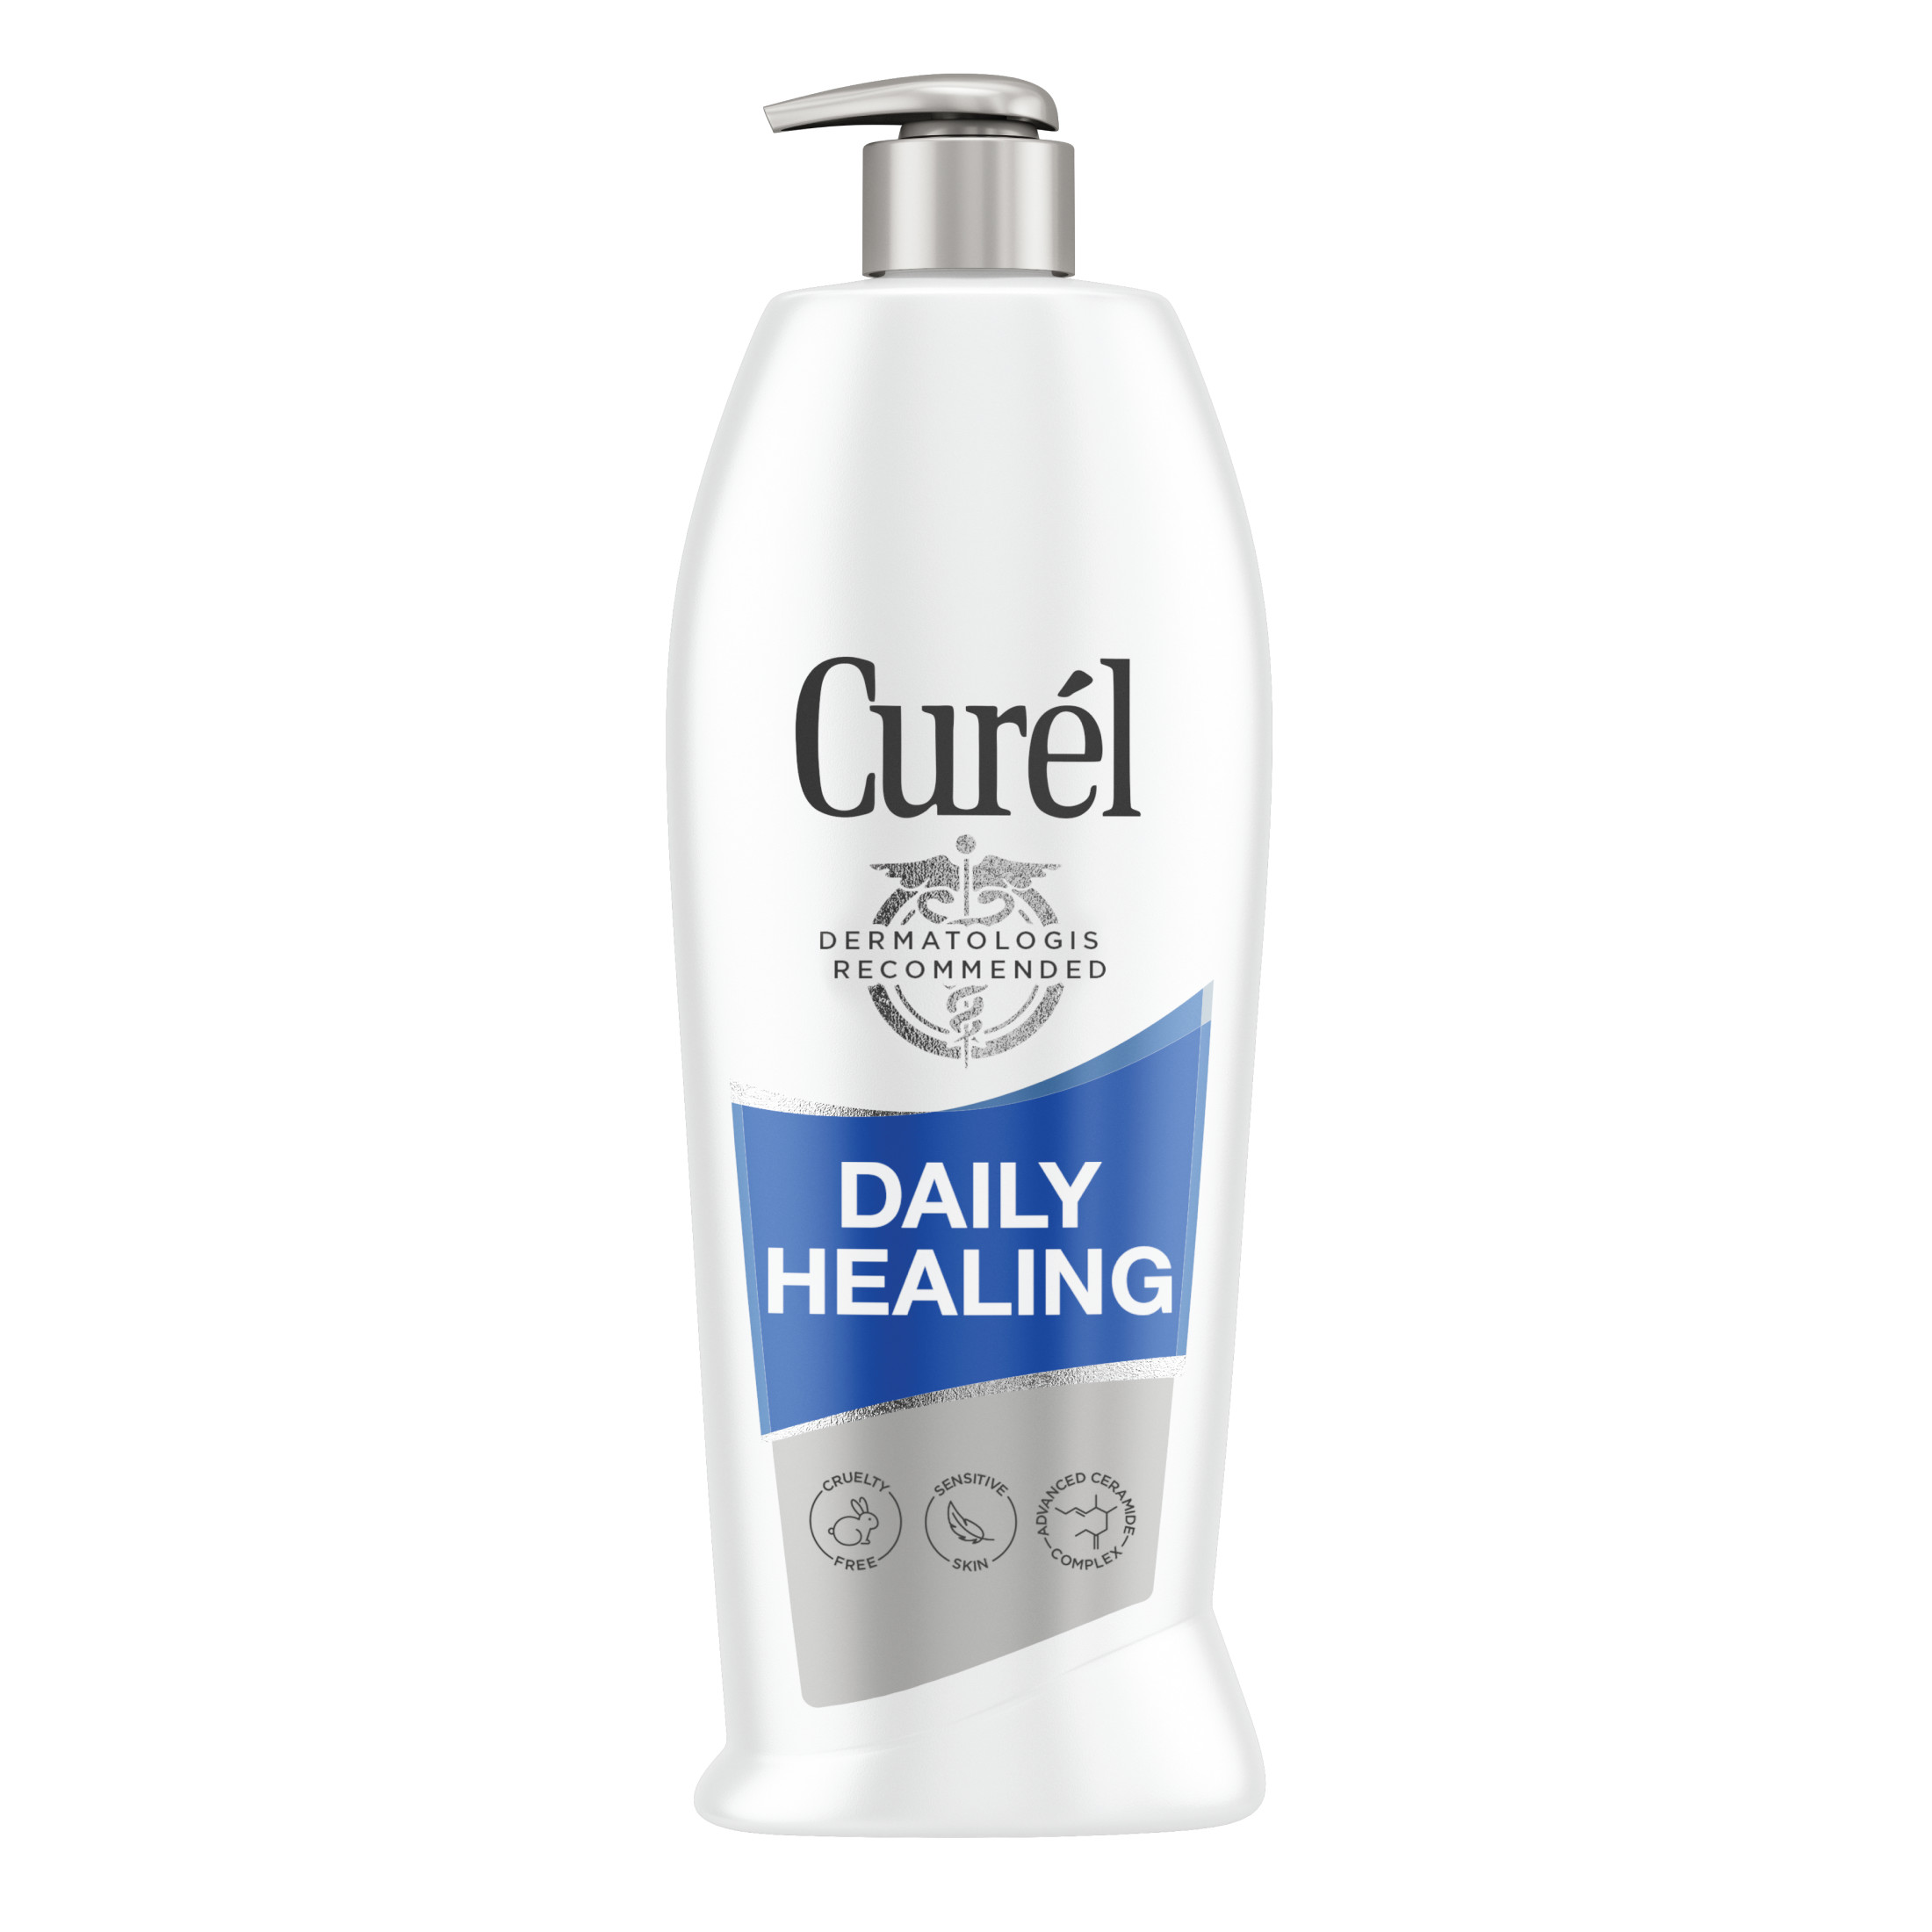 Curel Daily Healing Hand and Body Lotion for Dry Skin, Dermatologist Recommended, with Advanced Ceramides Complex, 20 Ounce Pump Bottle - image 1 of 9